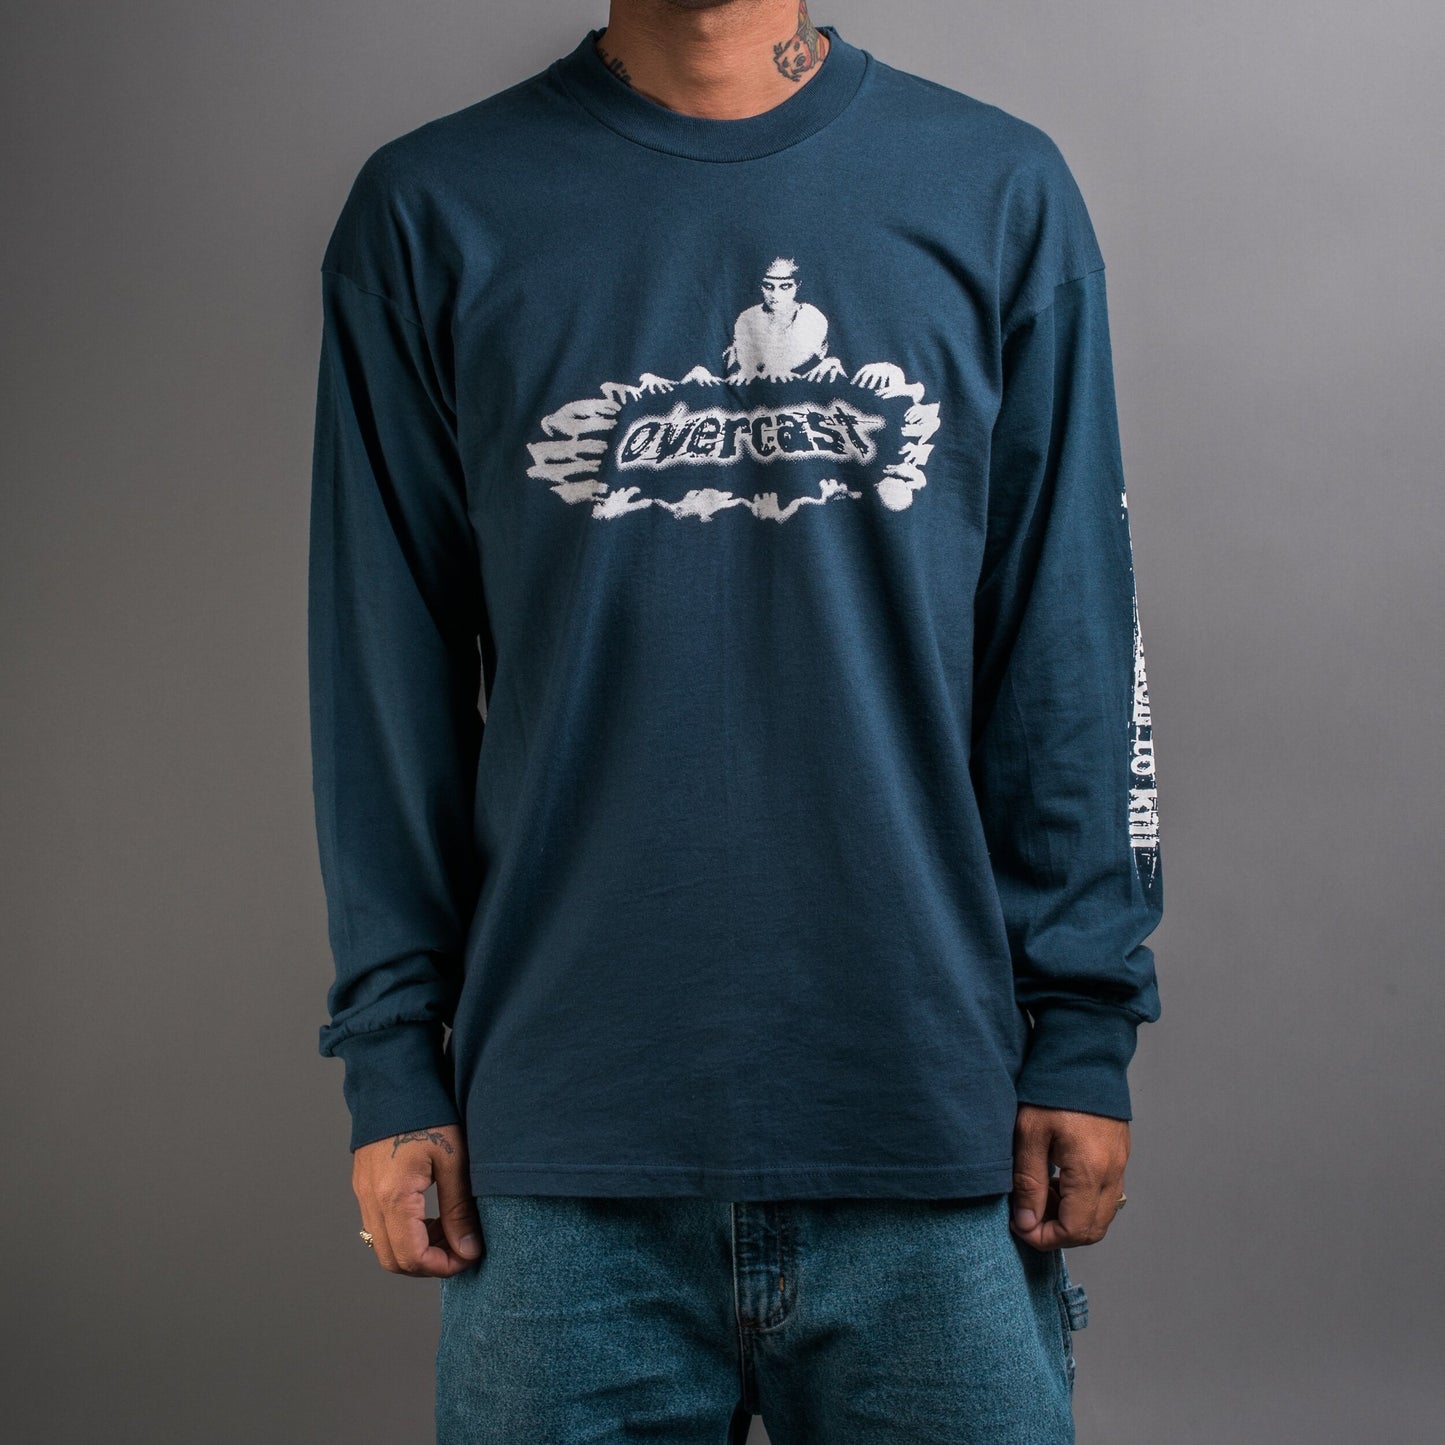 Vintage 90’s Overcast Fight Ambition To Kill Longsleeve